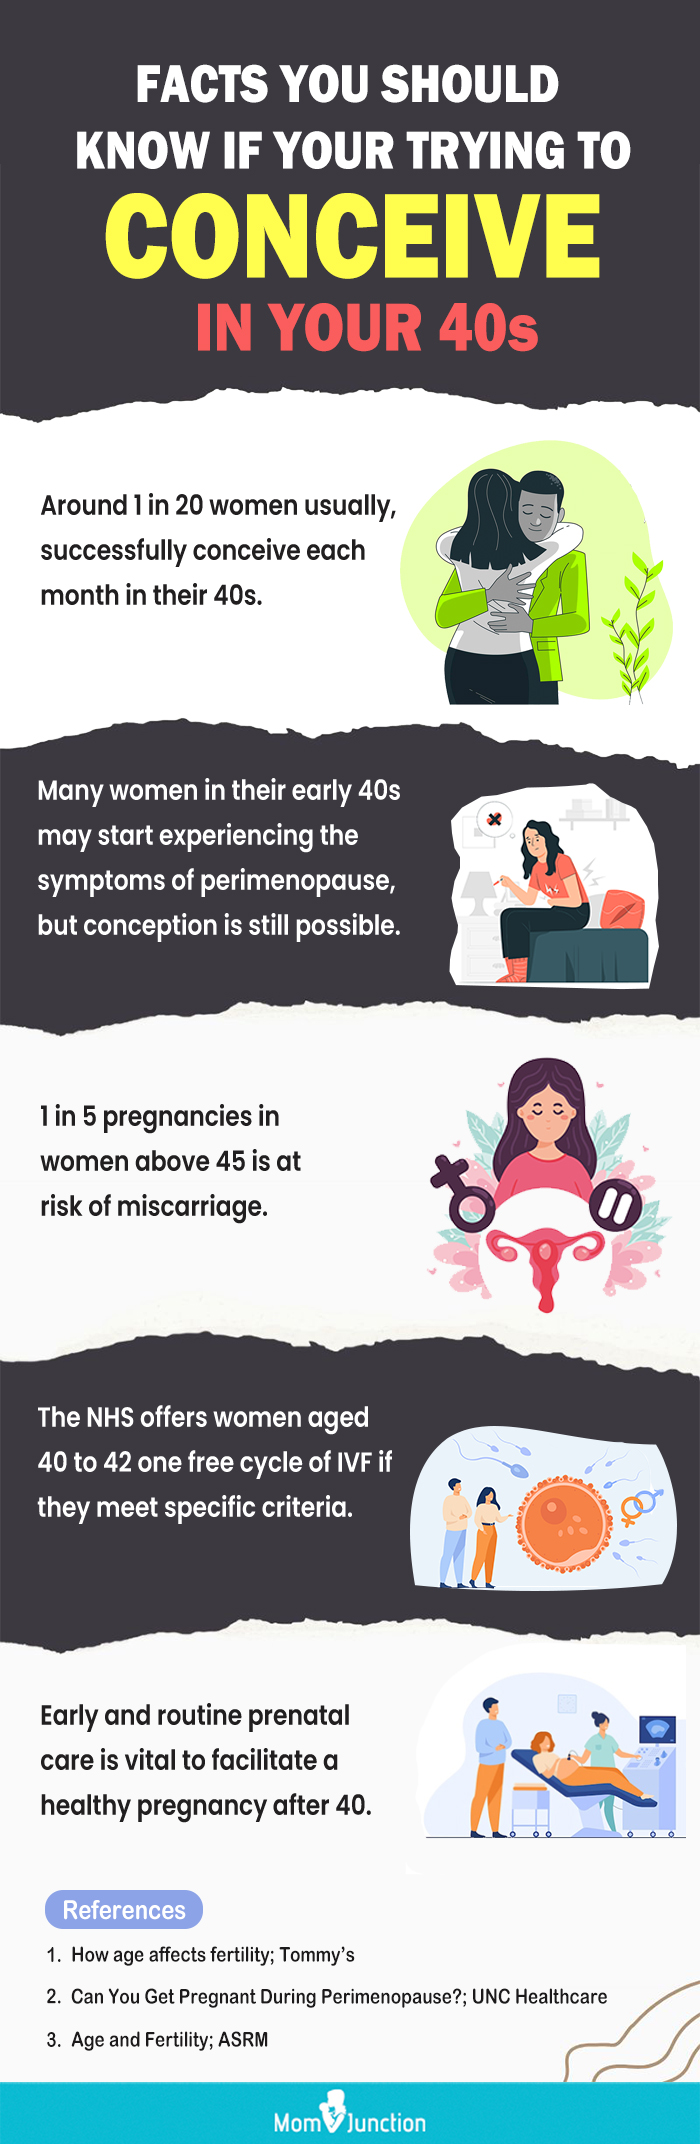 facts on conceiving in your 40s (infographic)